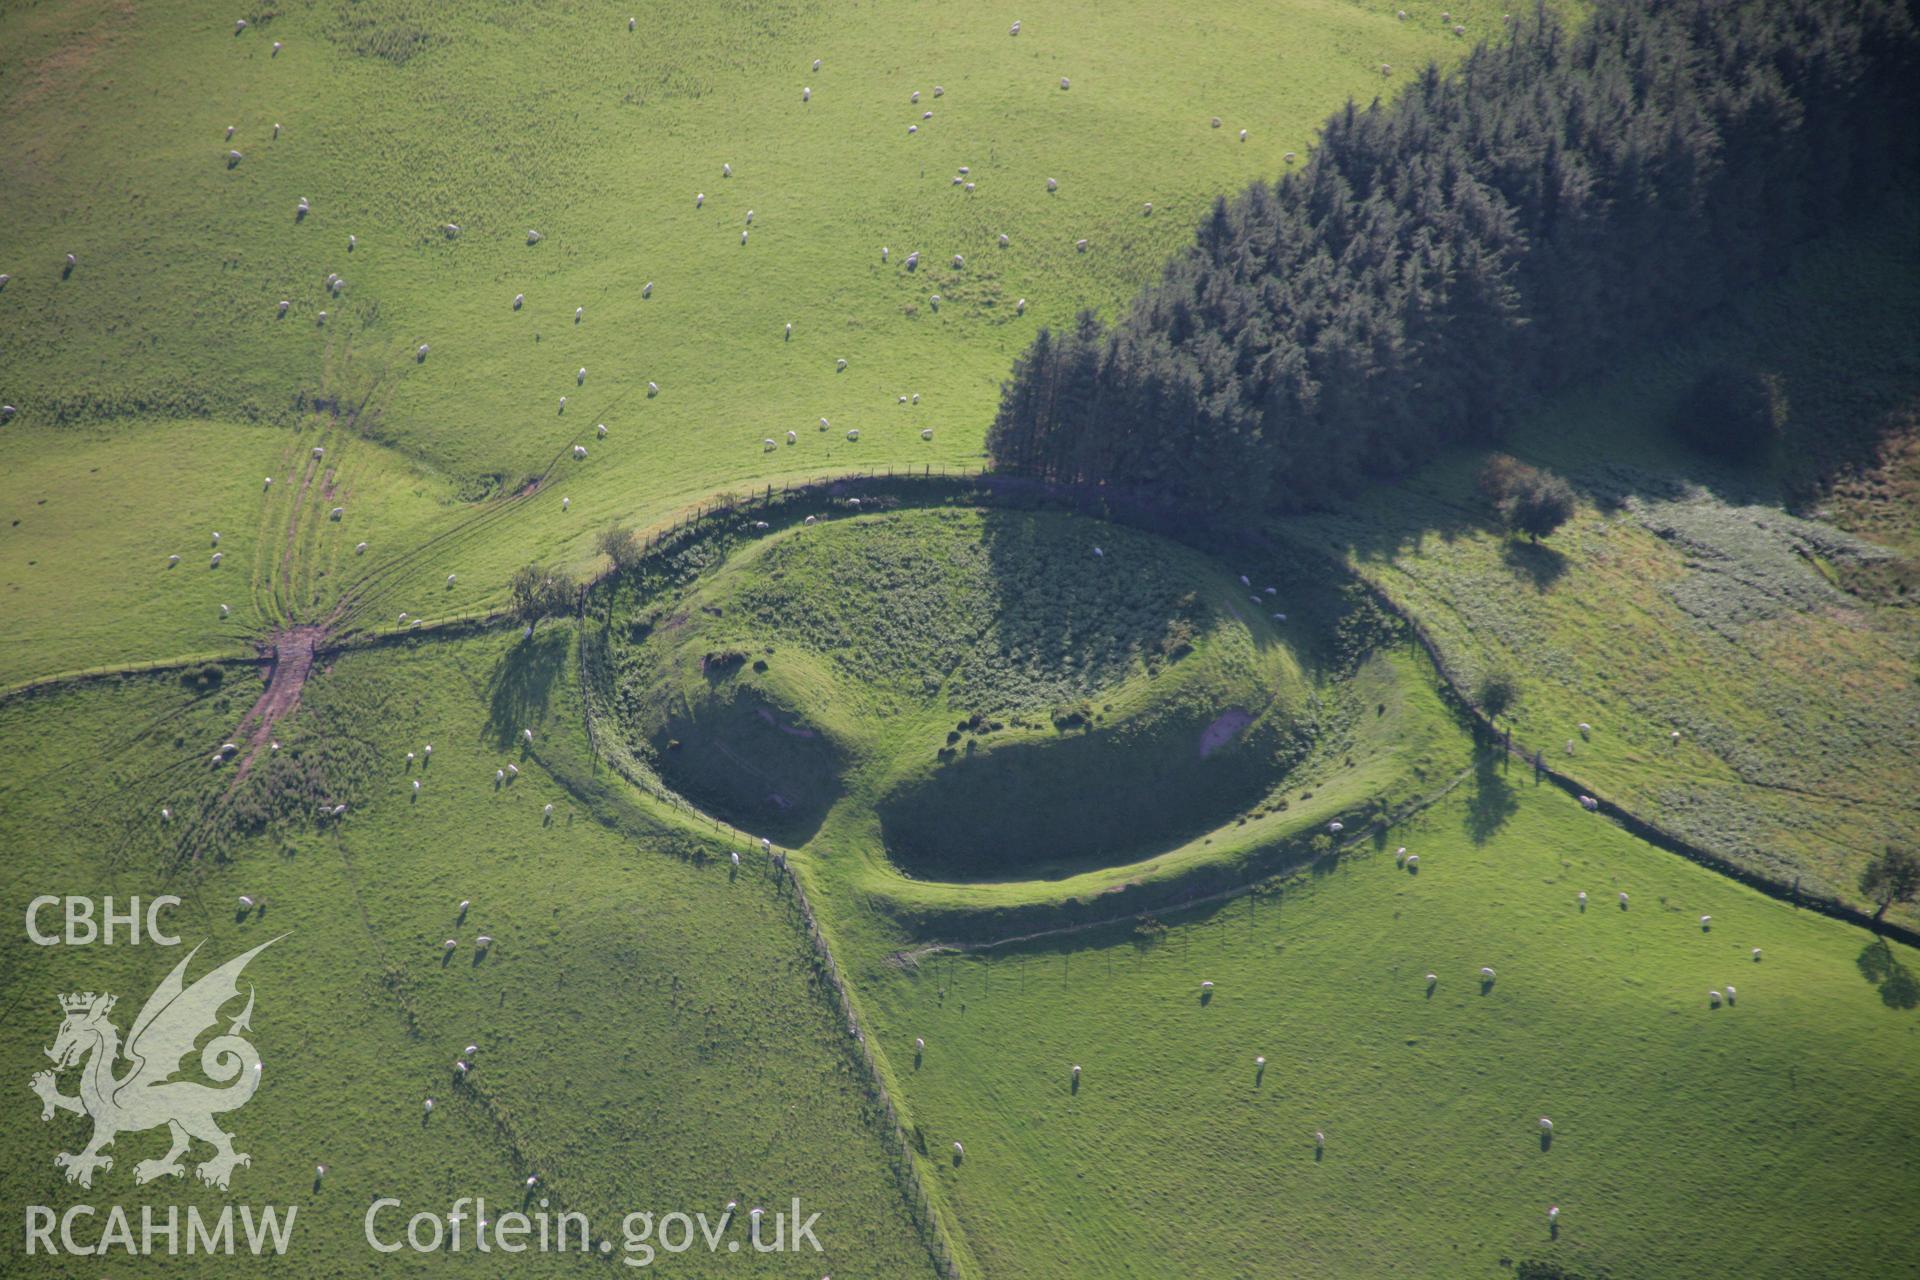 RCAHMW colour oblique aerial photograph of Waun Gynllwch (Coed Caeau) Defended Enclosure. Taken on 08 August 2007 by Toby Driver